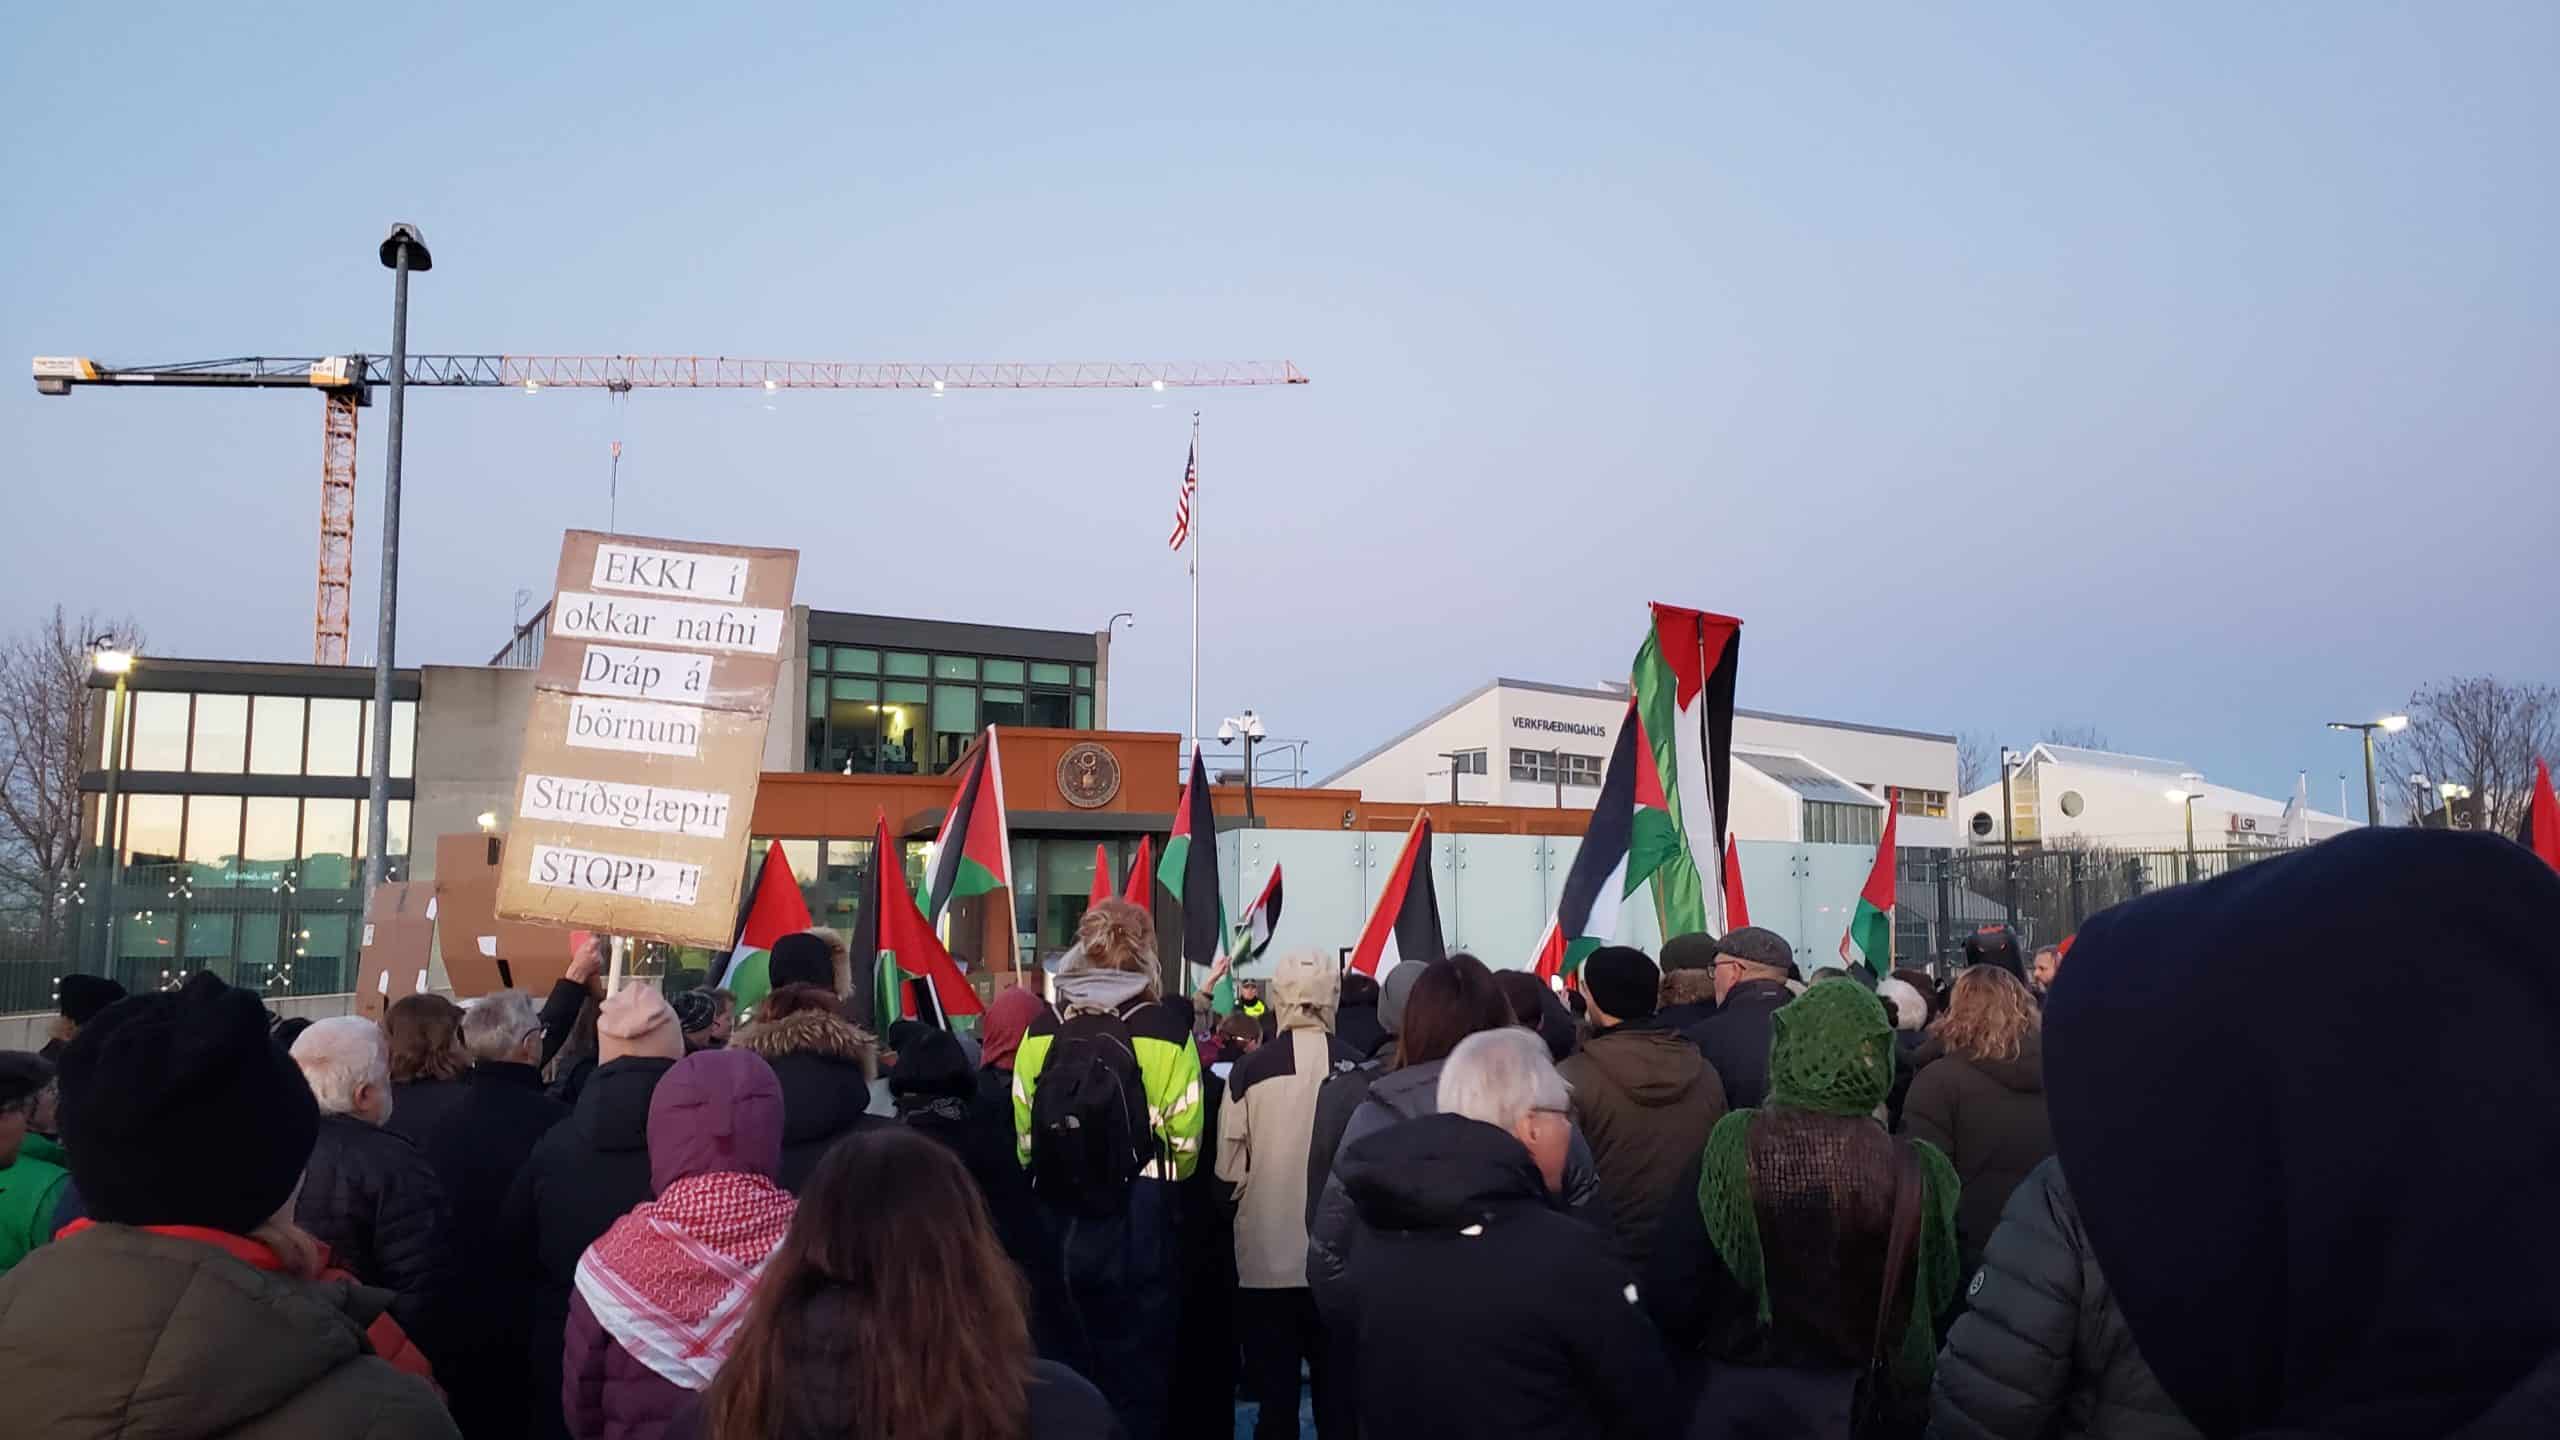 Protest, Parliamentary Resolution Call for Immediate Gaza Ceasefire